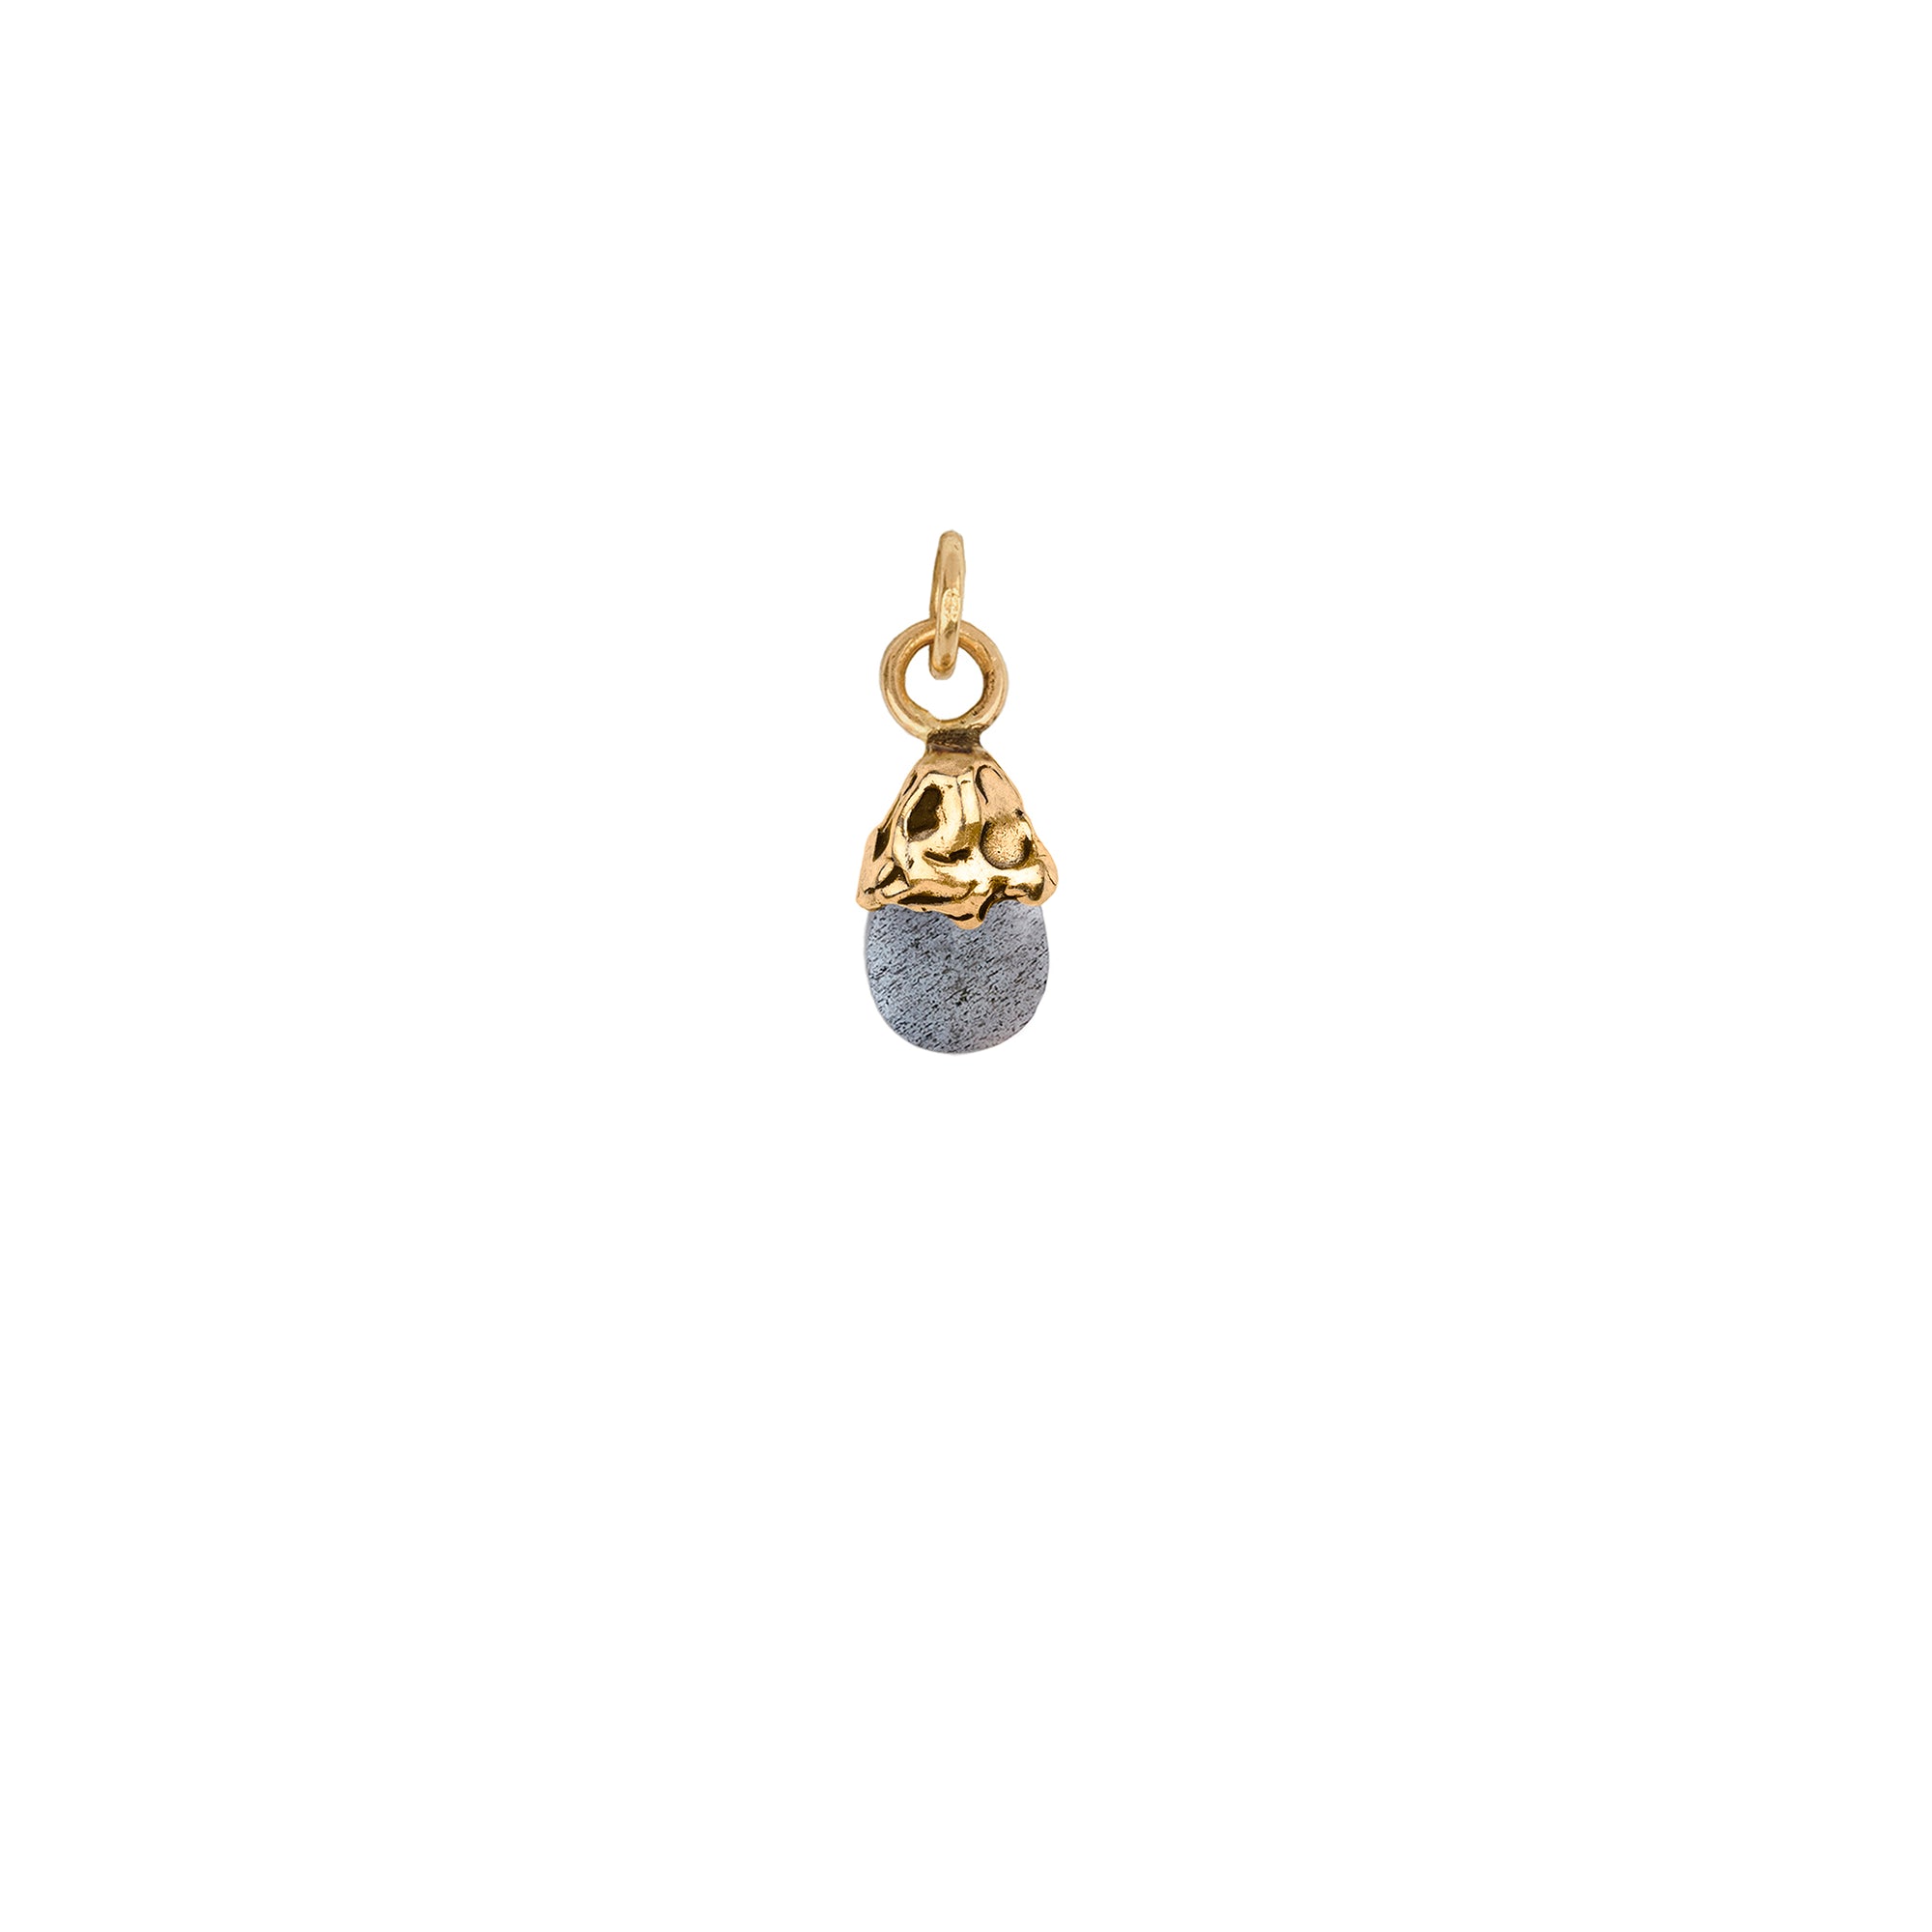 Harmony 14K Gold Capped Attraction Charm